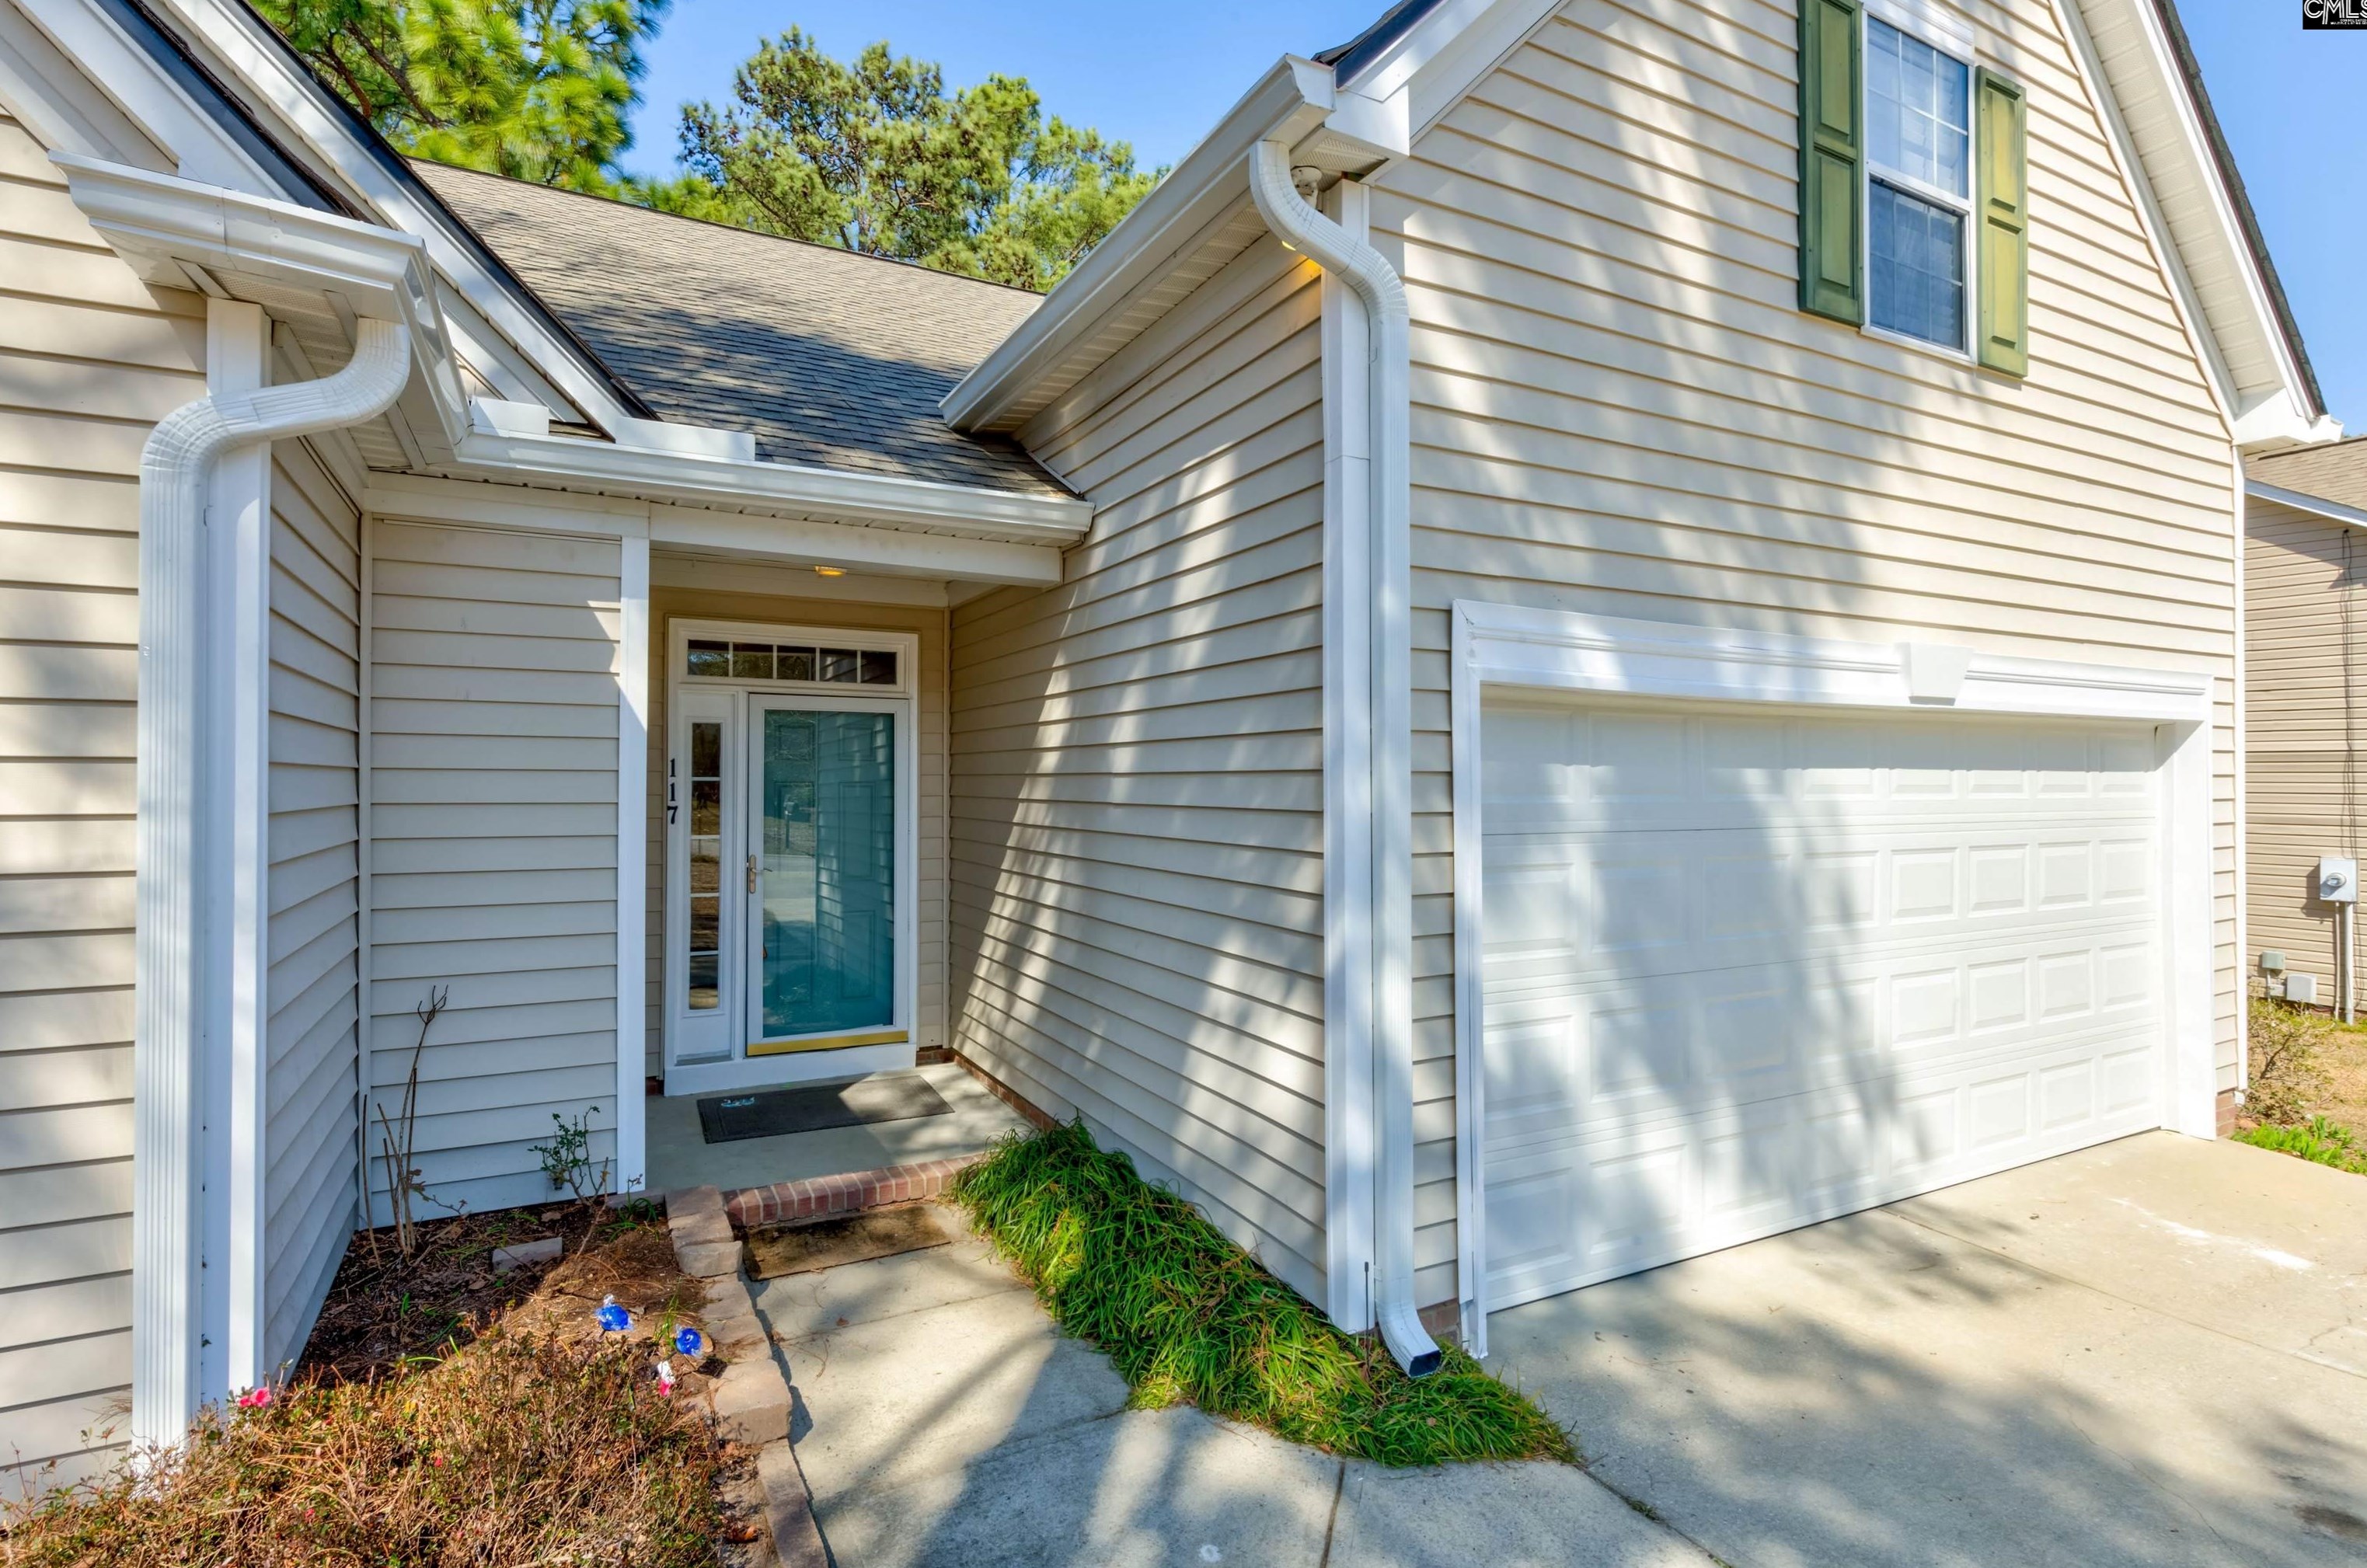 117 Coulter Pine Ln, Columbia, SC 29229